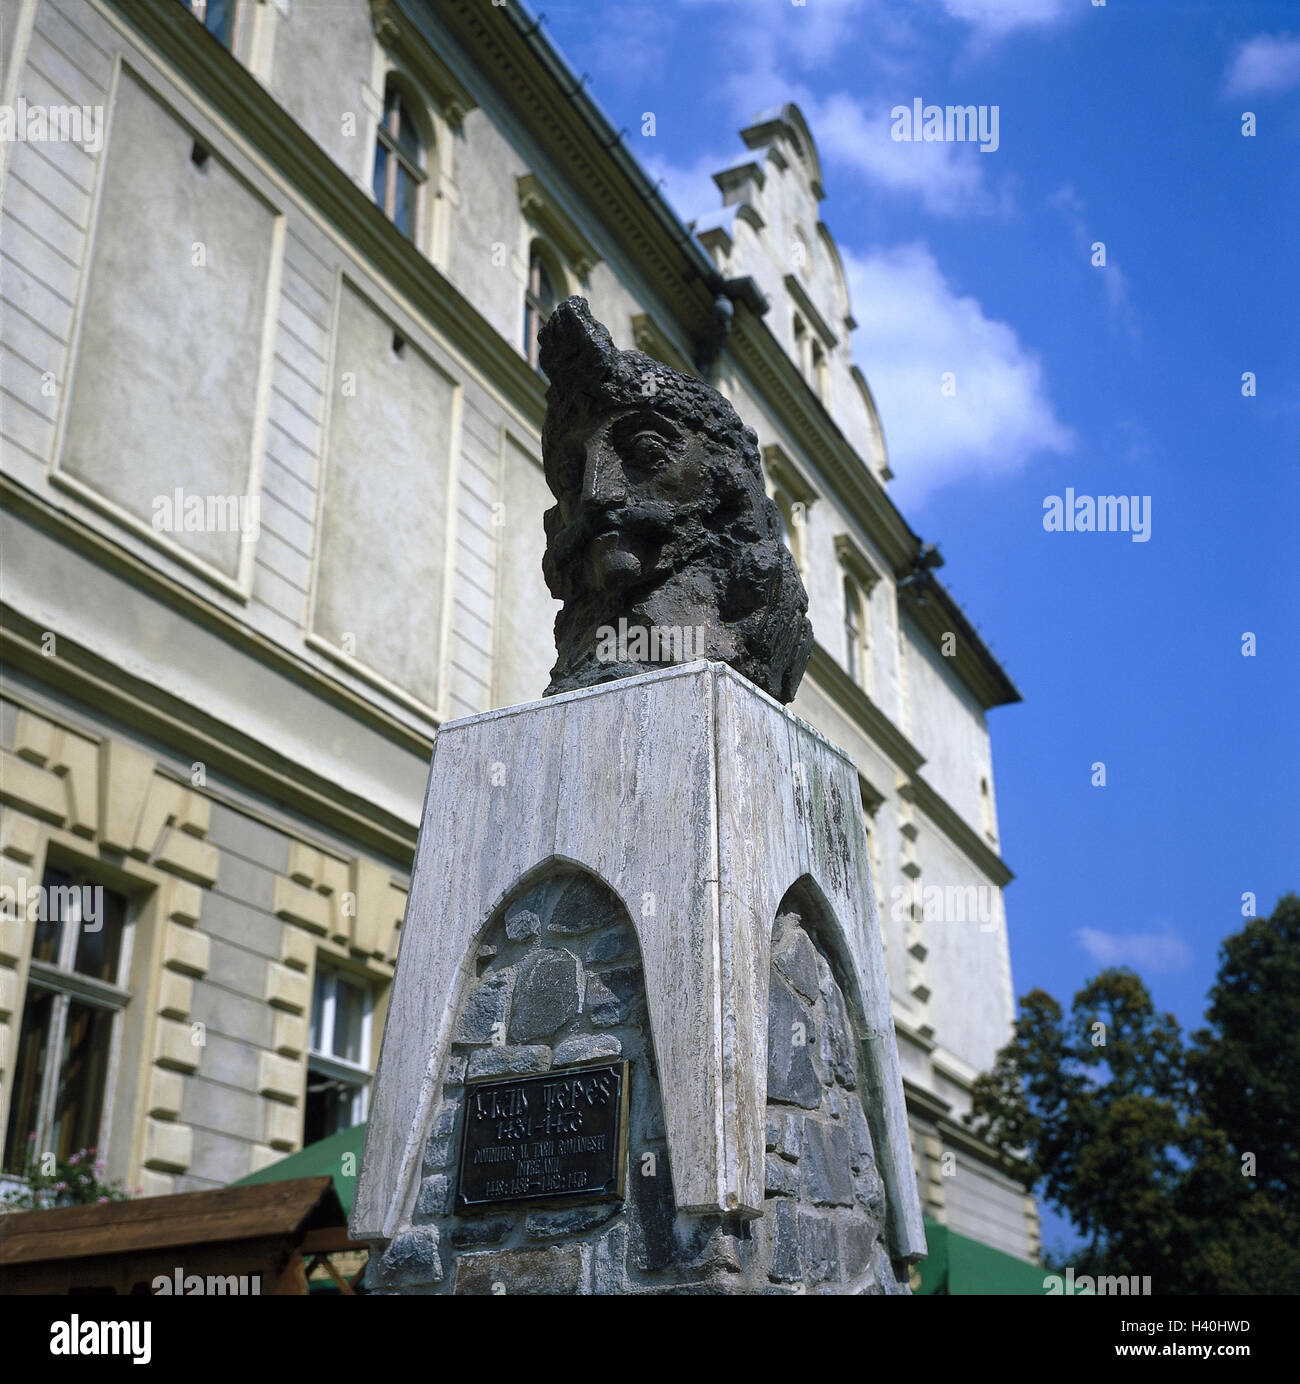 Romania, Sighisoara, monument, 'Vlad Tepes', Southeast, Europe, Transylvania, Transylvania, castle Schäss, bust, statue, recollection, 'father the Dracula model', place of interest, culture, outside Stock Photo